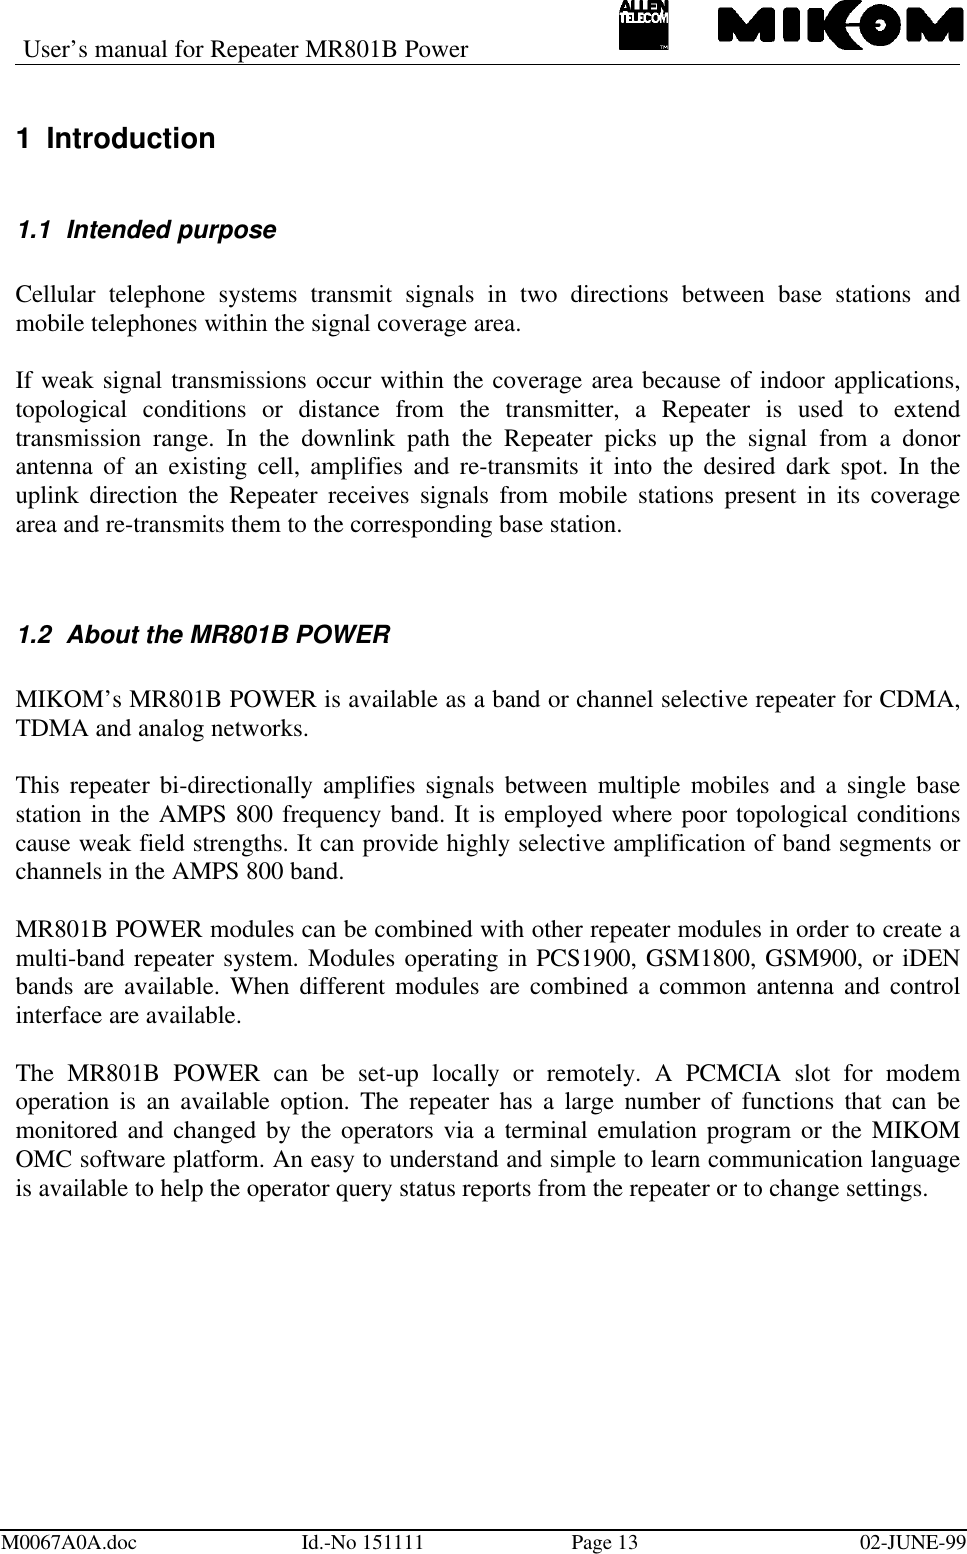 User’s manual for Repeater MR801B PowerM0067A0A.doc Id.-No 151111 Page 13 02-JUNE-991 Introduction1.1 Intended purposeCellular telephone systems transmit signals in two directions between base stations andmobile telephones within the signal coverage area.If weak signal transmissions occur within the coverage area because of indoor applications,topological conditions or distance from the transmitter, a Repeater is used to extendtransmission range. In the downlink path the Repeater picks up the signal from a donorantenna of an existing cell, amplifies and re-transmits it into the desired dark spot. In theuplink direction the Repeater receives signals from mobile stations present in its coveragearea and re-transmits them to the corresponding base station.1.2 About the MR801B POWERMIKOM’s MR801B POWER is available as a band or channel selective repeater for CDMA,TDMA and analog networks.This repeater bi-directionally amplifies signals between multiple mobiles and a single basestation in the AMPS 800 frequency band. It is employed where poor topological conditionscause weak field strengths. It can provide highly selective amplification of band segments orchannels in the AMPS 800 band.MR801B POWER modules can be combined with other repeater modules in order to create amulti-band repeater system. Modules operating in PCS1900, GSM1800, GSM900, or iDENbands are available. When different modules are combined a common antenna and controlinterface are available.The MR801B POWER can be set-up locally or remotely. A PCMCIA slot for modemoperation is an available option. The repeater has a large number of functions that can bemonitored and changed by the operators via a terminal emulation program or the MIKOMOMC software platform. An easy to understand and simple to learn communication languageis available to help the operator query status reports from the repeater or to change settings.